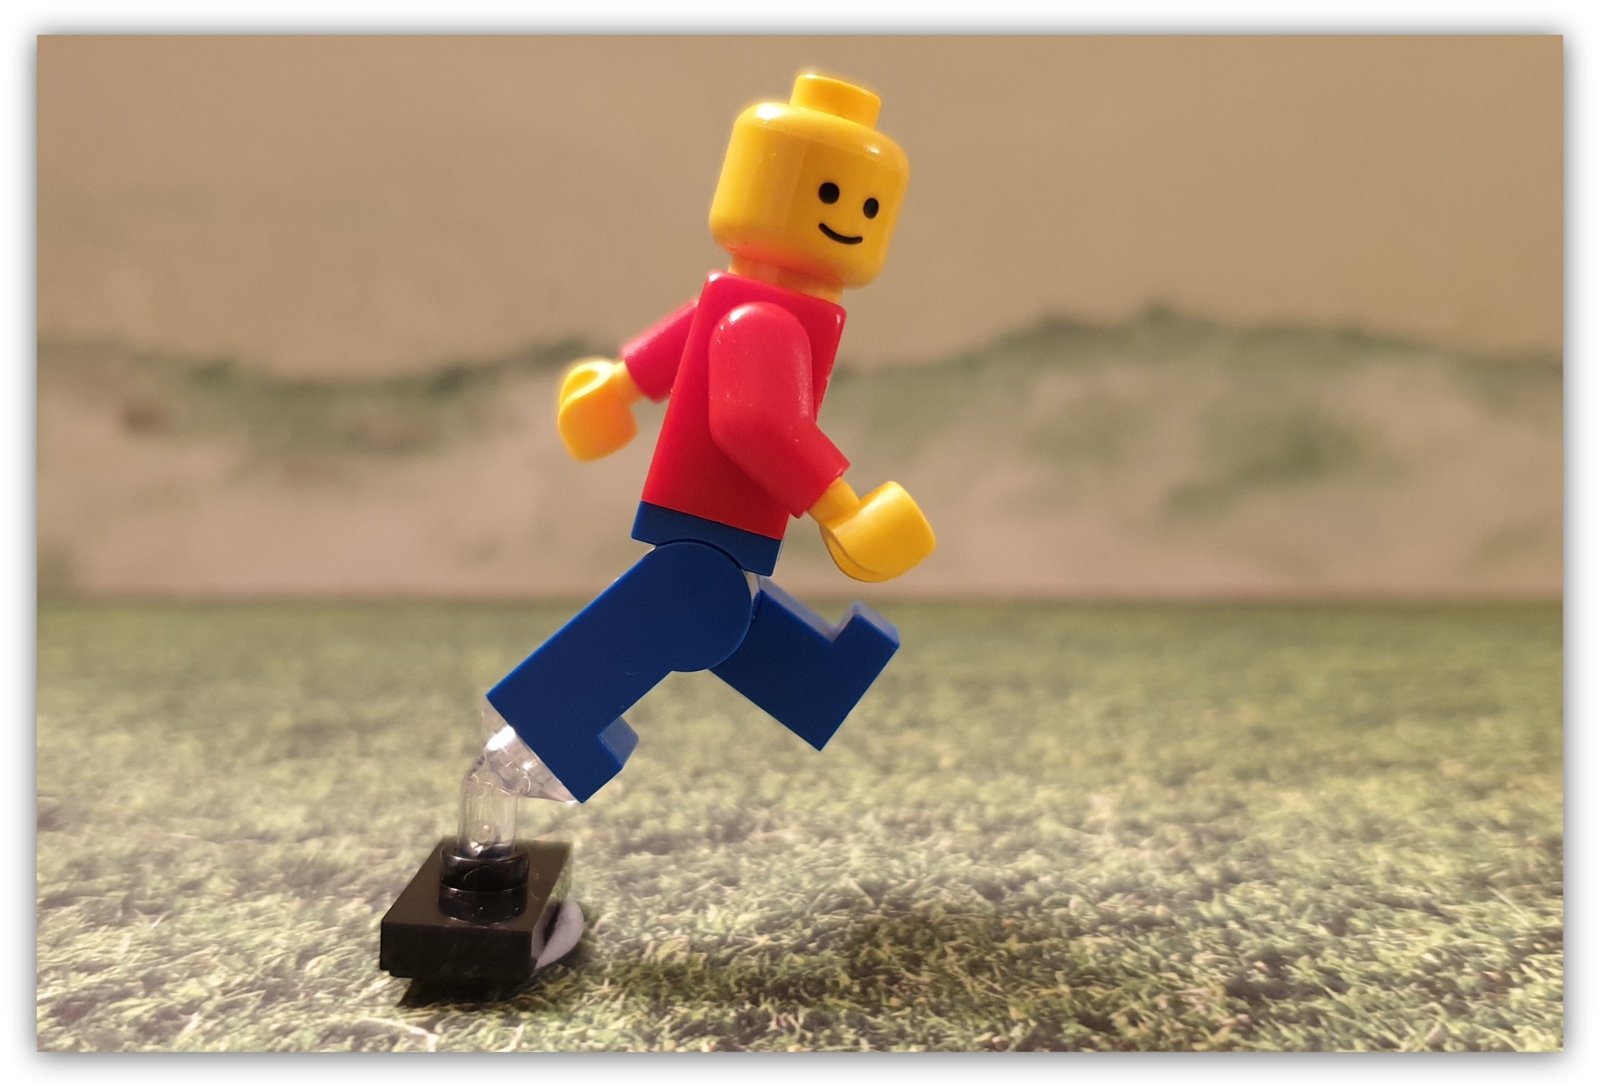 Movement your LEGO Minifigures to Spice Up Your